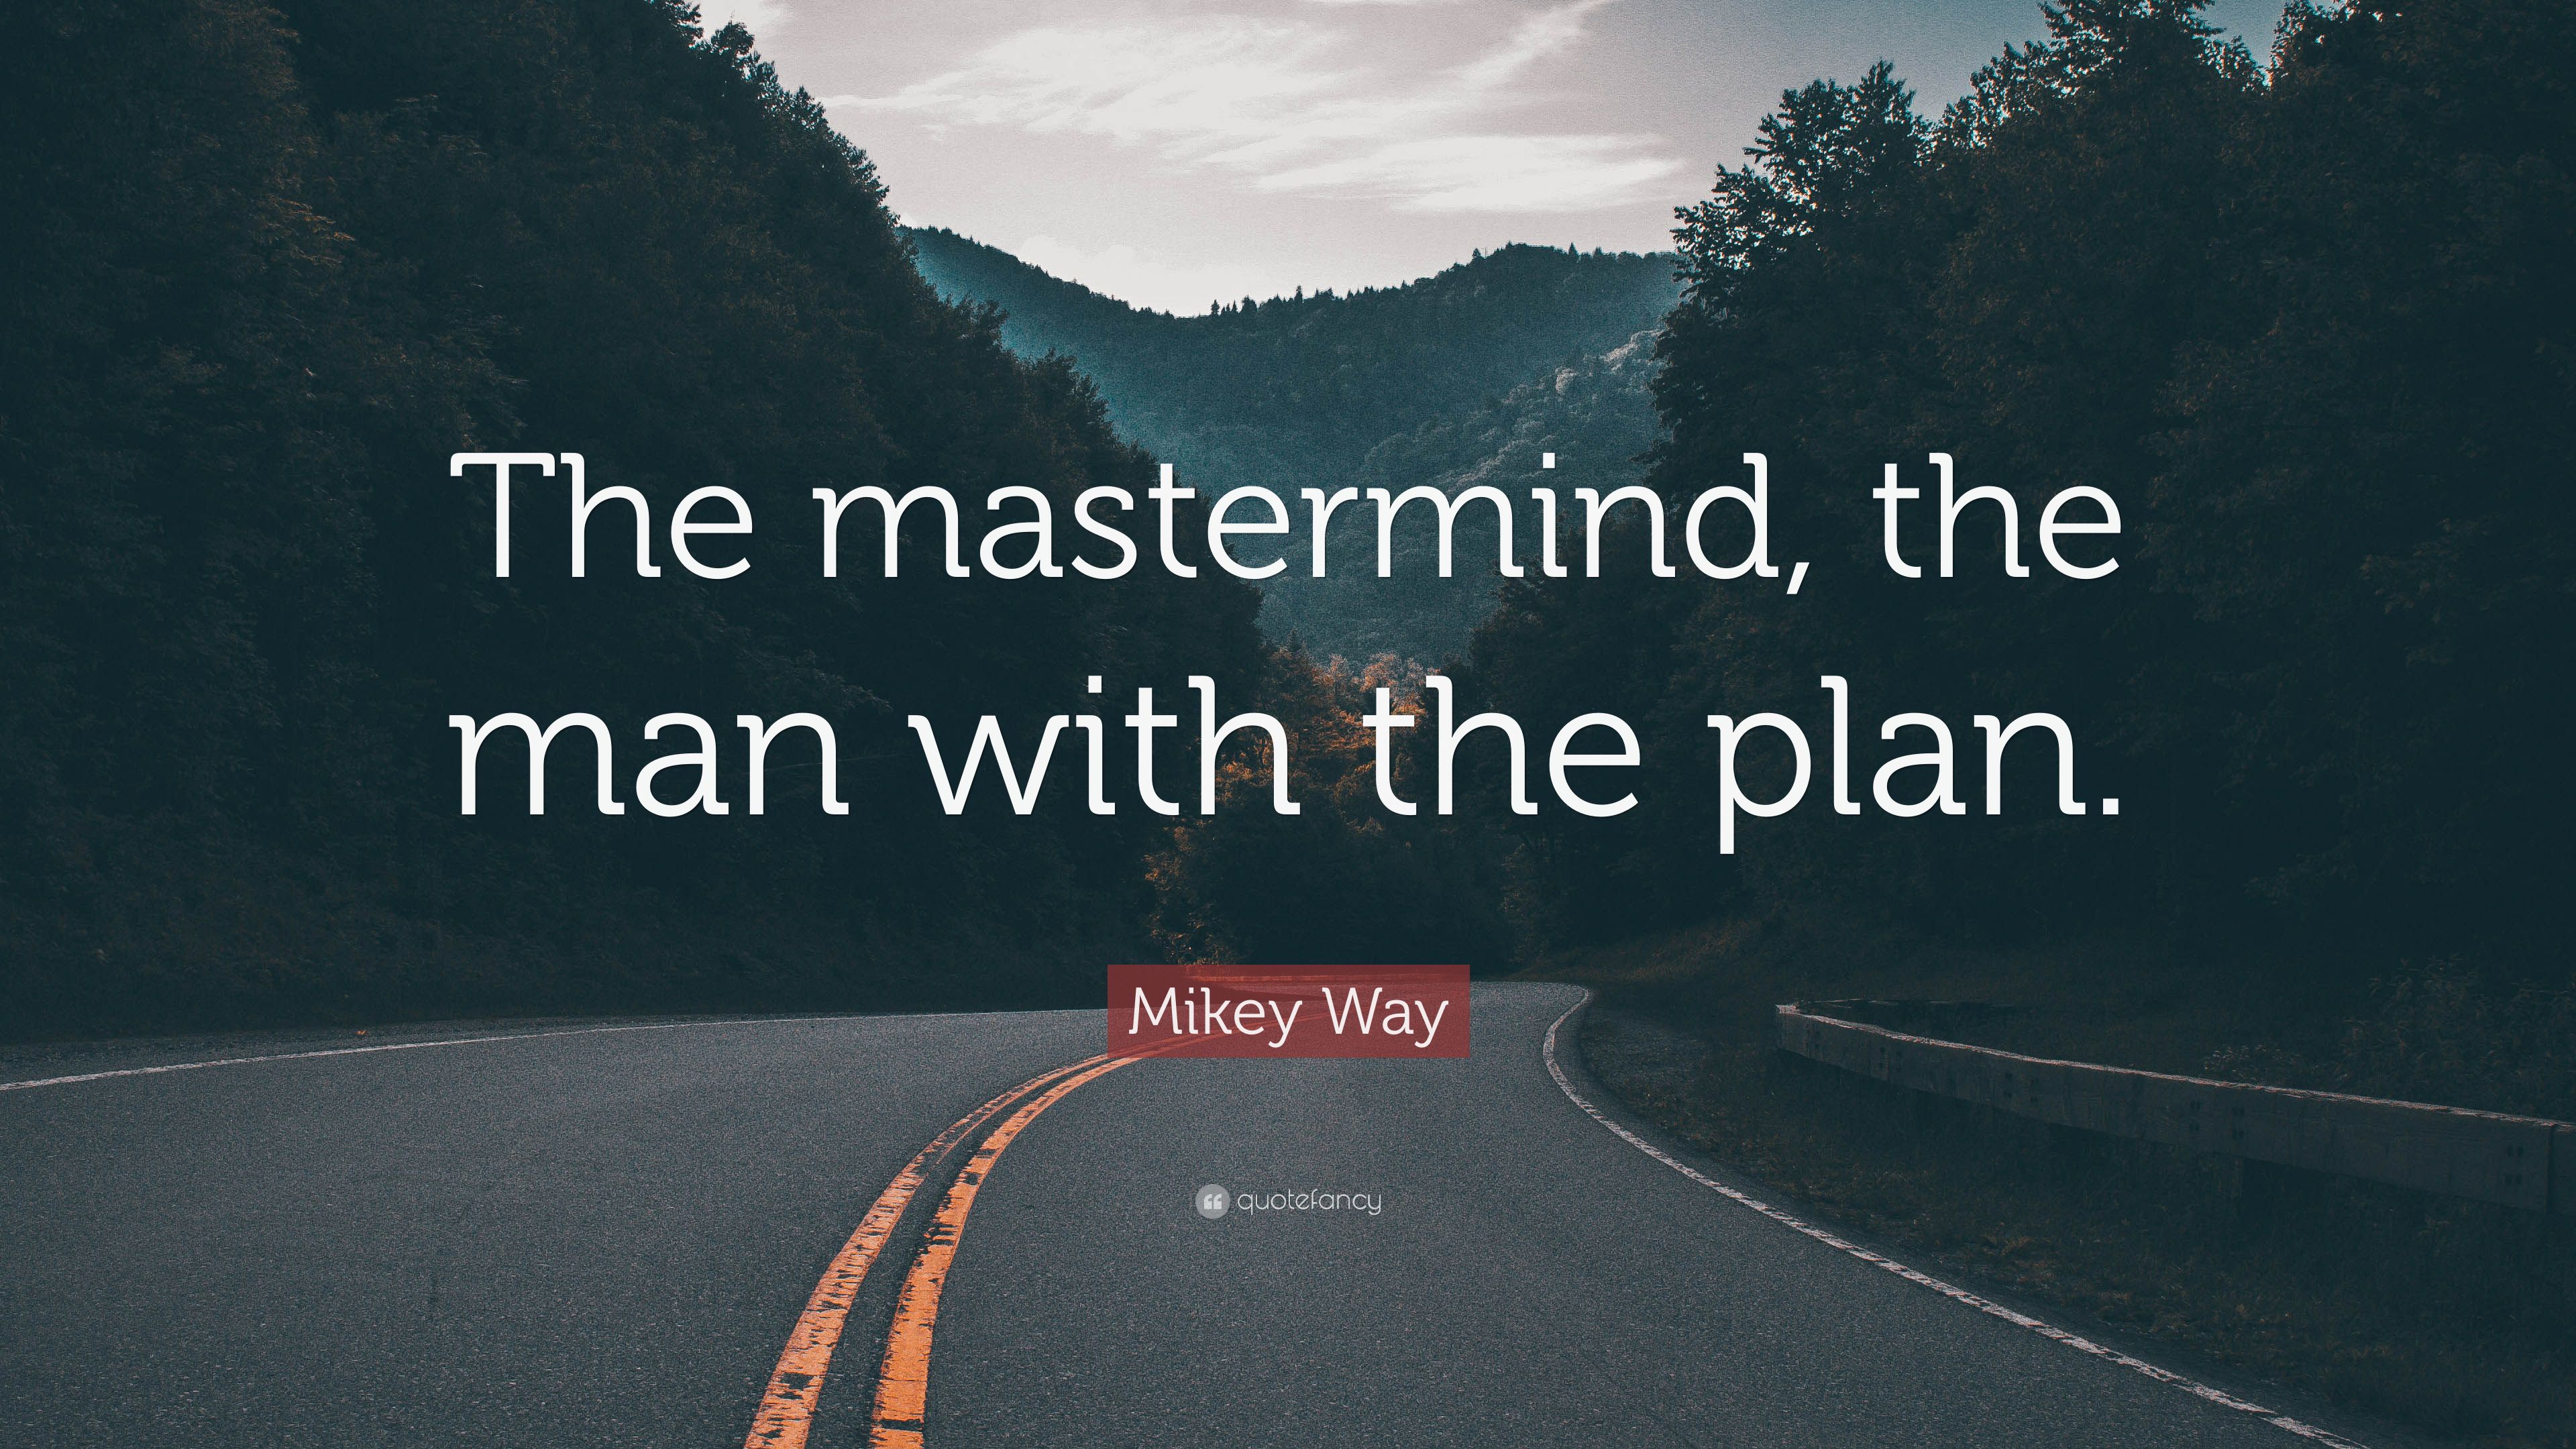 Mikey Way Quote: “The mastermind, the man with the plan.” 7